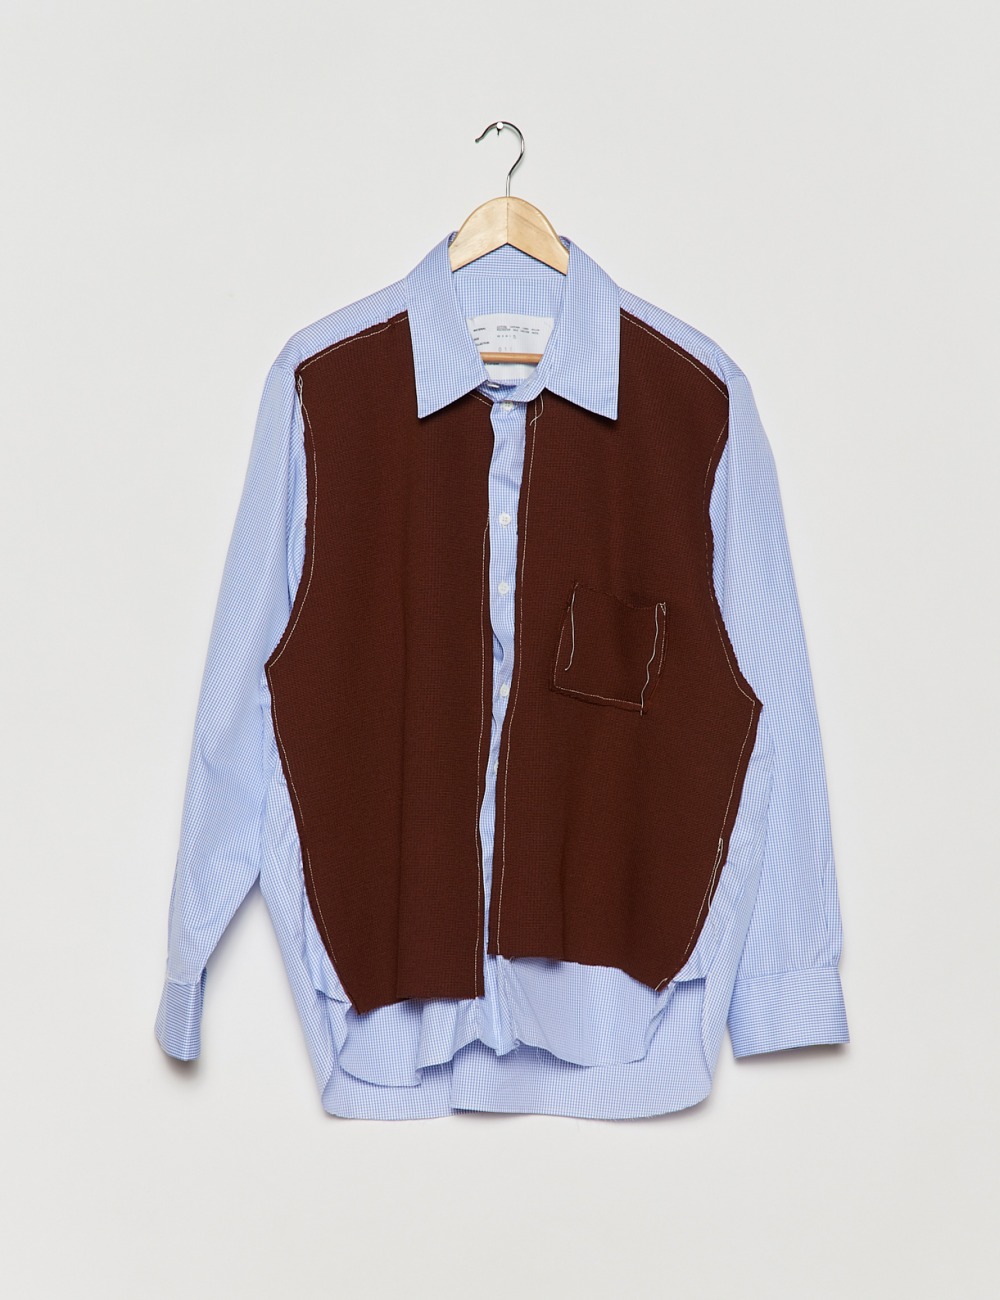 RESEARCH SPENCER SHIRT_BROWN